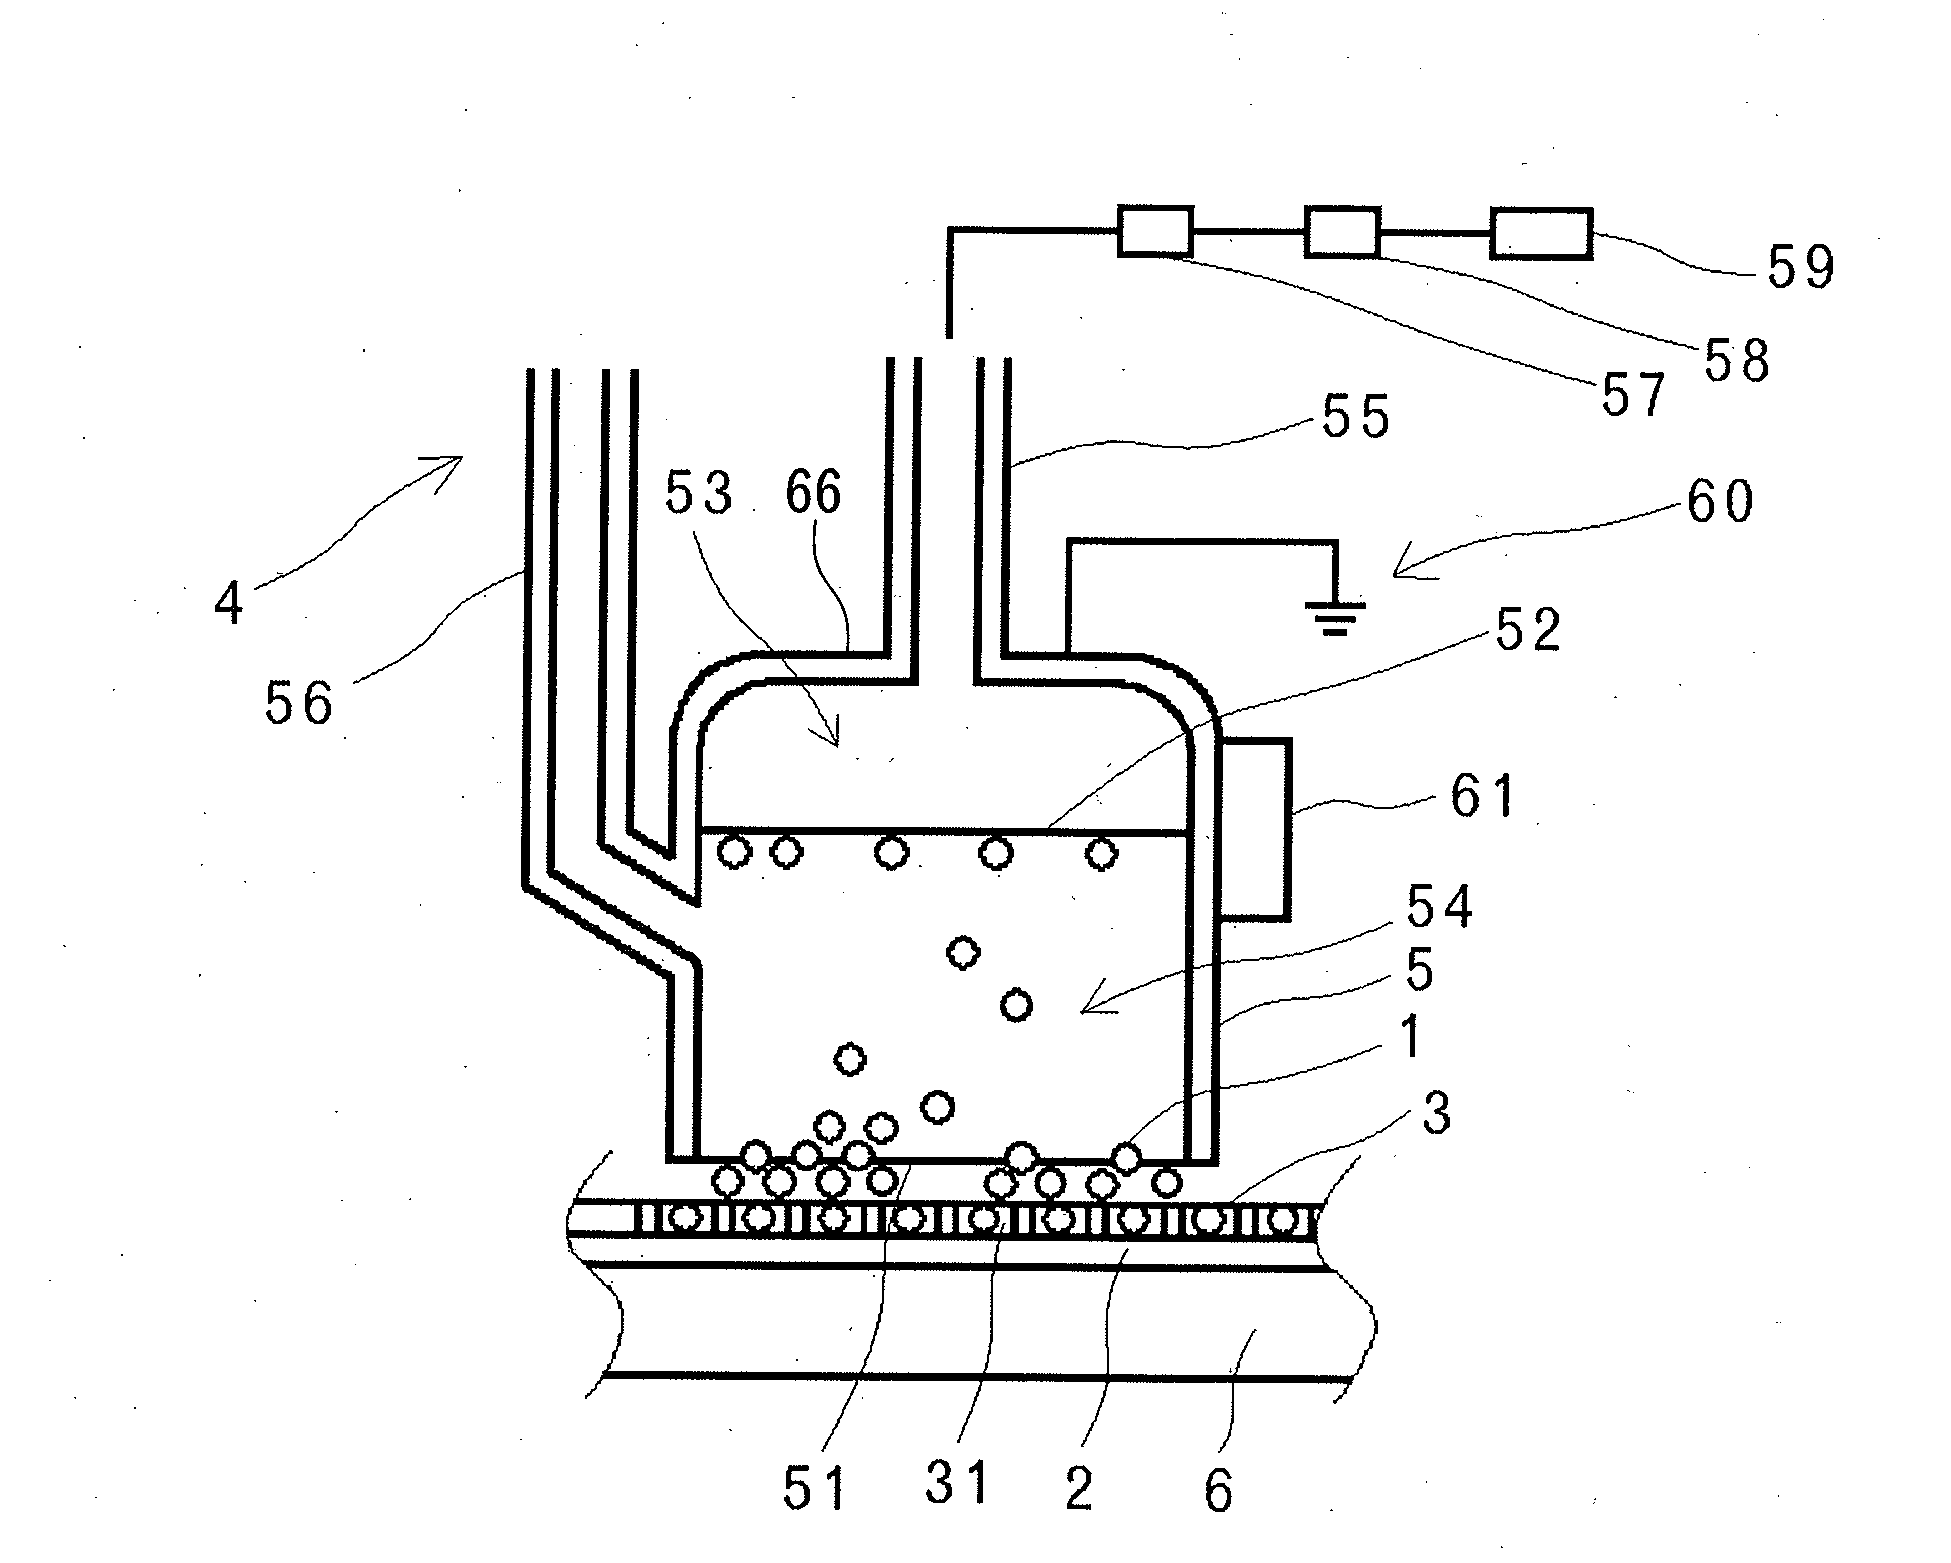 Method and apparatus for mounting conductive balls